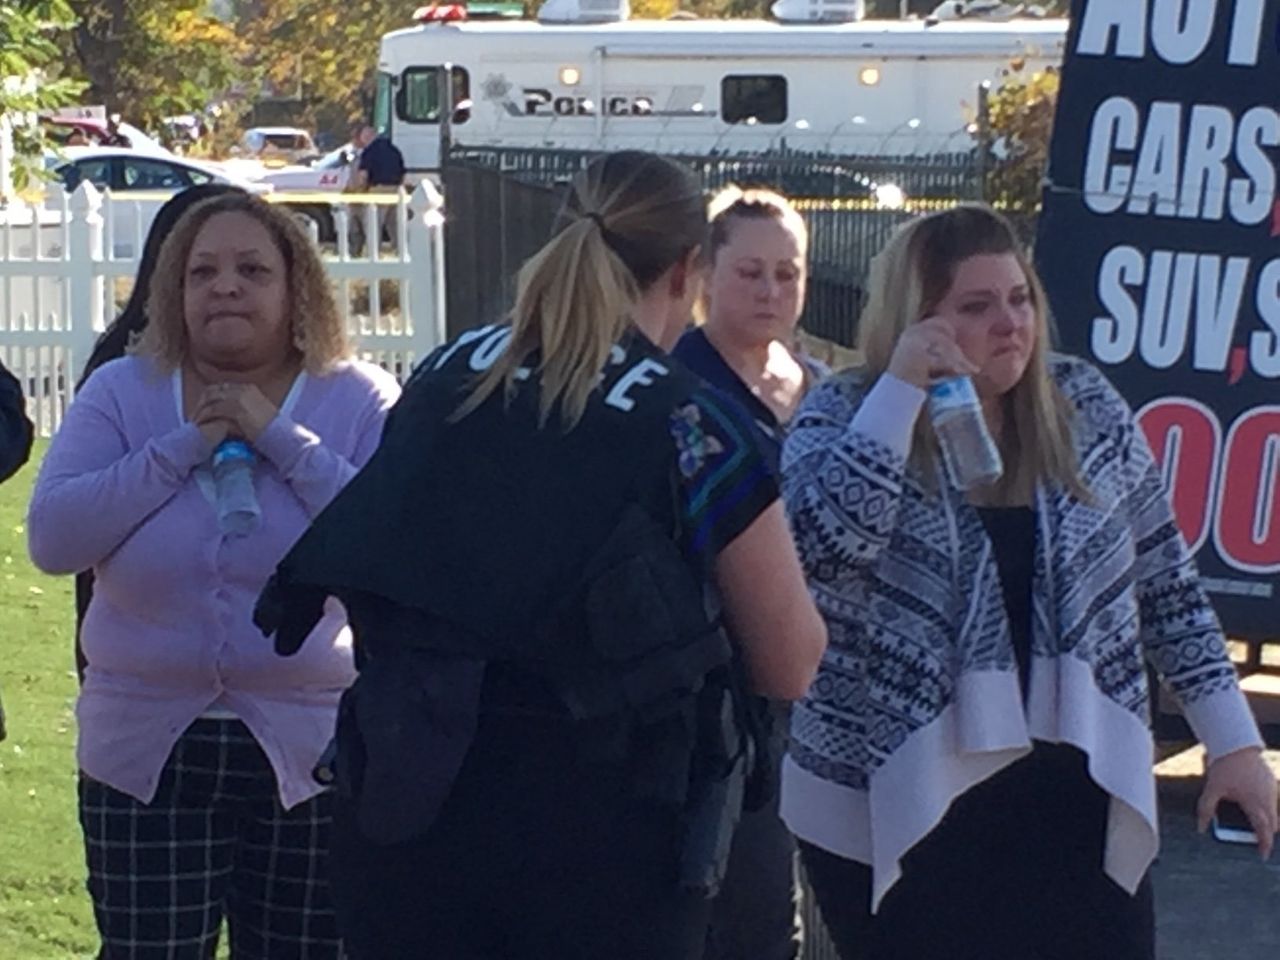 Employees of the Inland Regional Center become emotional outside the shooting scene in San Bernardino, California, on Dec. 2, 2015.